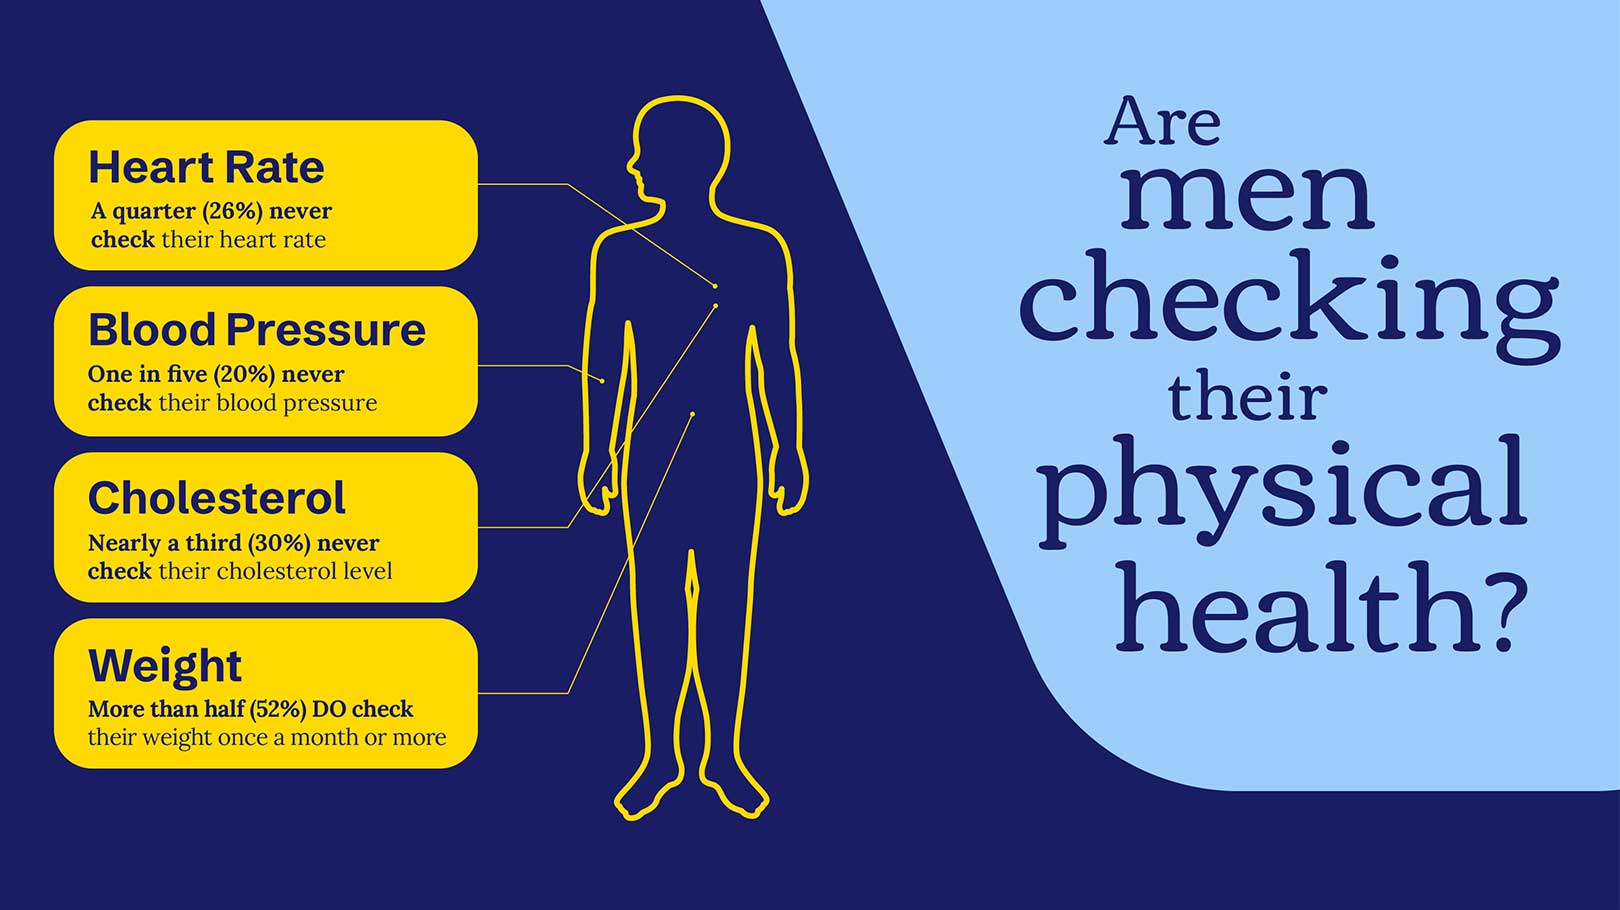 Are men checking their physical health?